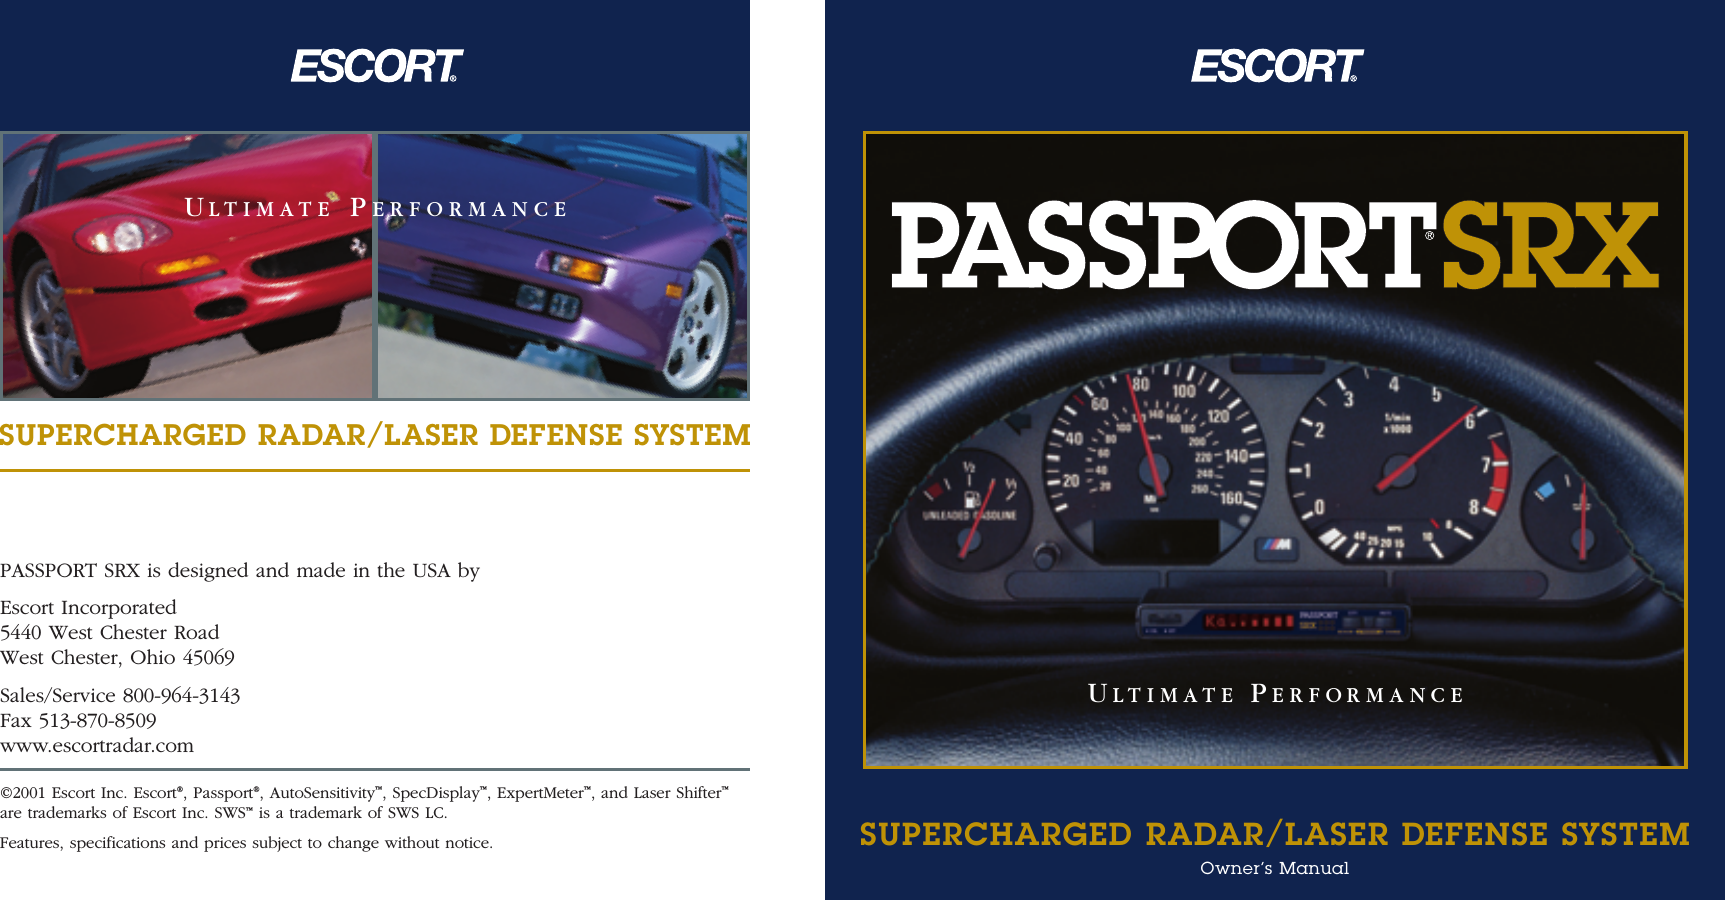 PASSPORT SRX is designed and made in the USA byEscort Incorporated5440 West Chester RoadWest Chester, Ohio 45069Sales/Service 800-964-3143Fax 513-870-8509www.escortradar.com©2001 Escort Inc. Escort®, Passport®, AutoSensitivity™, SpecDisplay™, ExpertMeter™, and Laser Shifter™are trademarks of Escort Inc. SWS™is a trademark of SWS LC. Features, specifications and prices subject to change without notice.SUPERCHARGED RADAR/LASER DEFENSE SYSTEMSUPERCHARGED RADAR/LASER DEFENSE SYSTEMOwner’s ManualULTIMATE PERFORMANCEULTIMATE PERFORMANCE